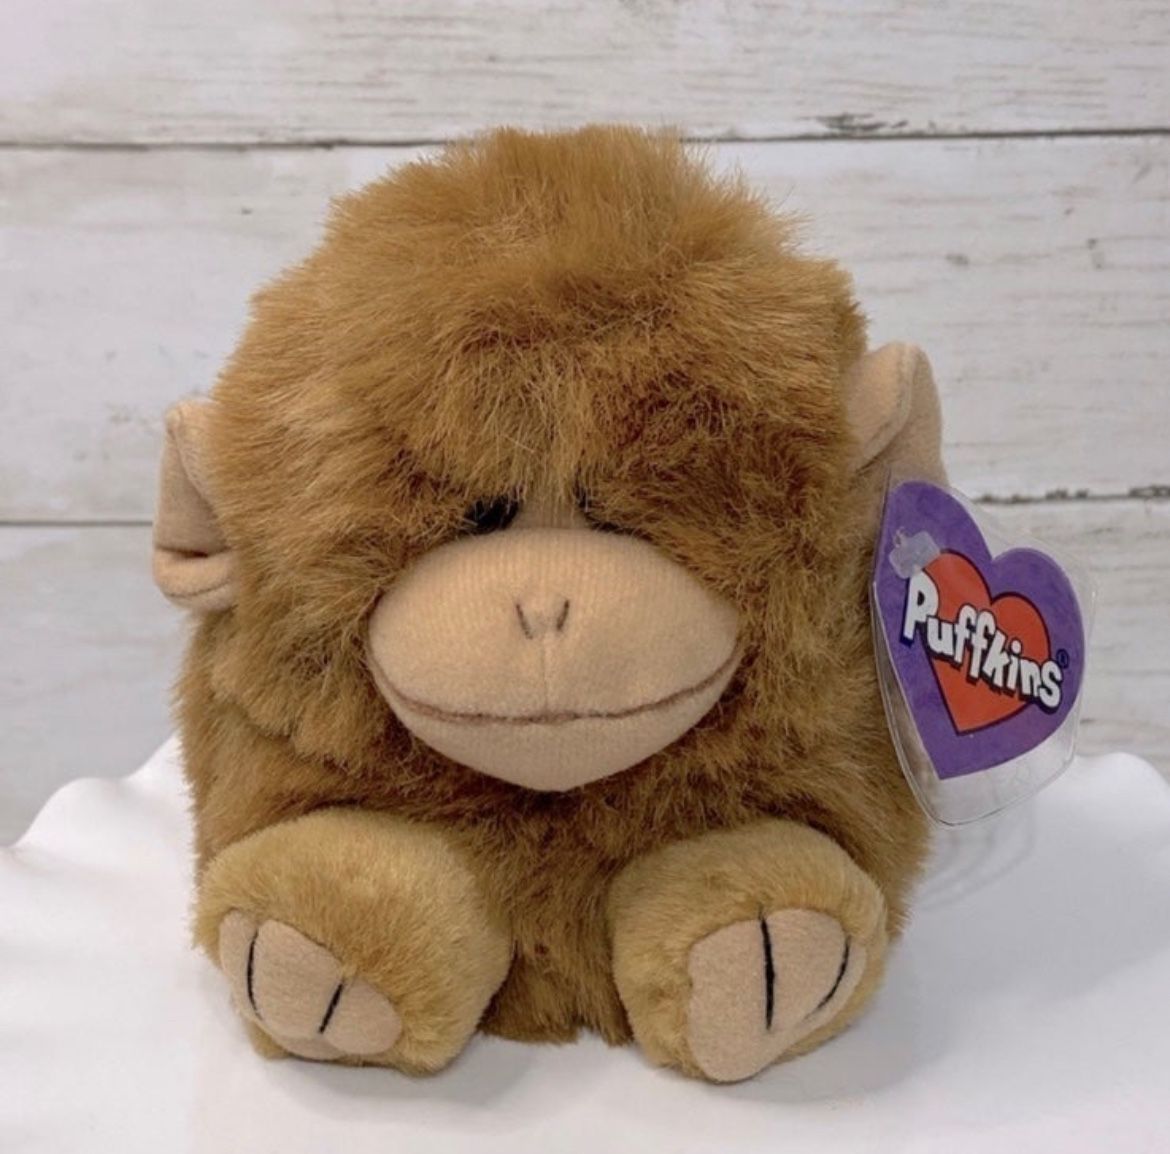 Vintage Puffkins Amber the Monkey